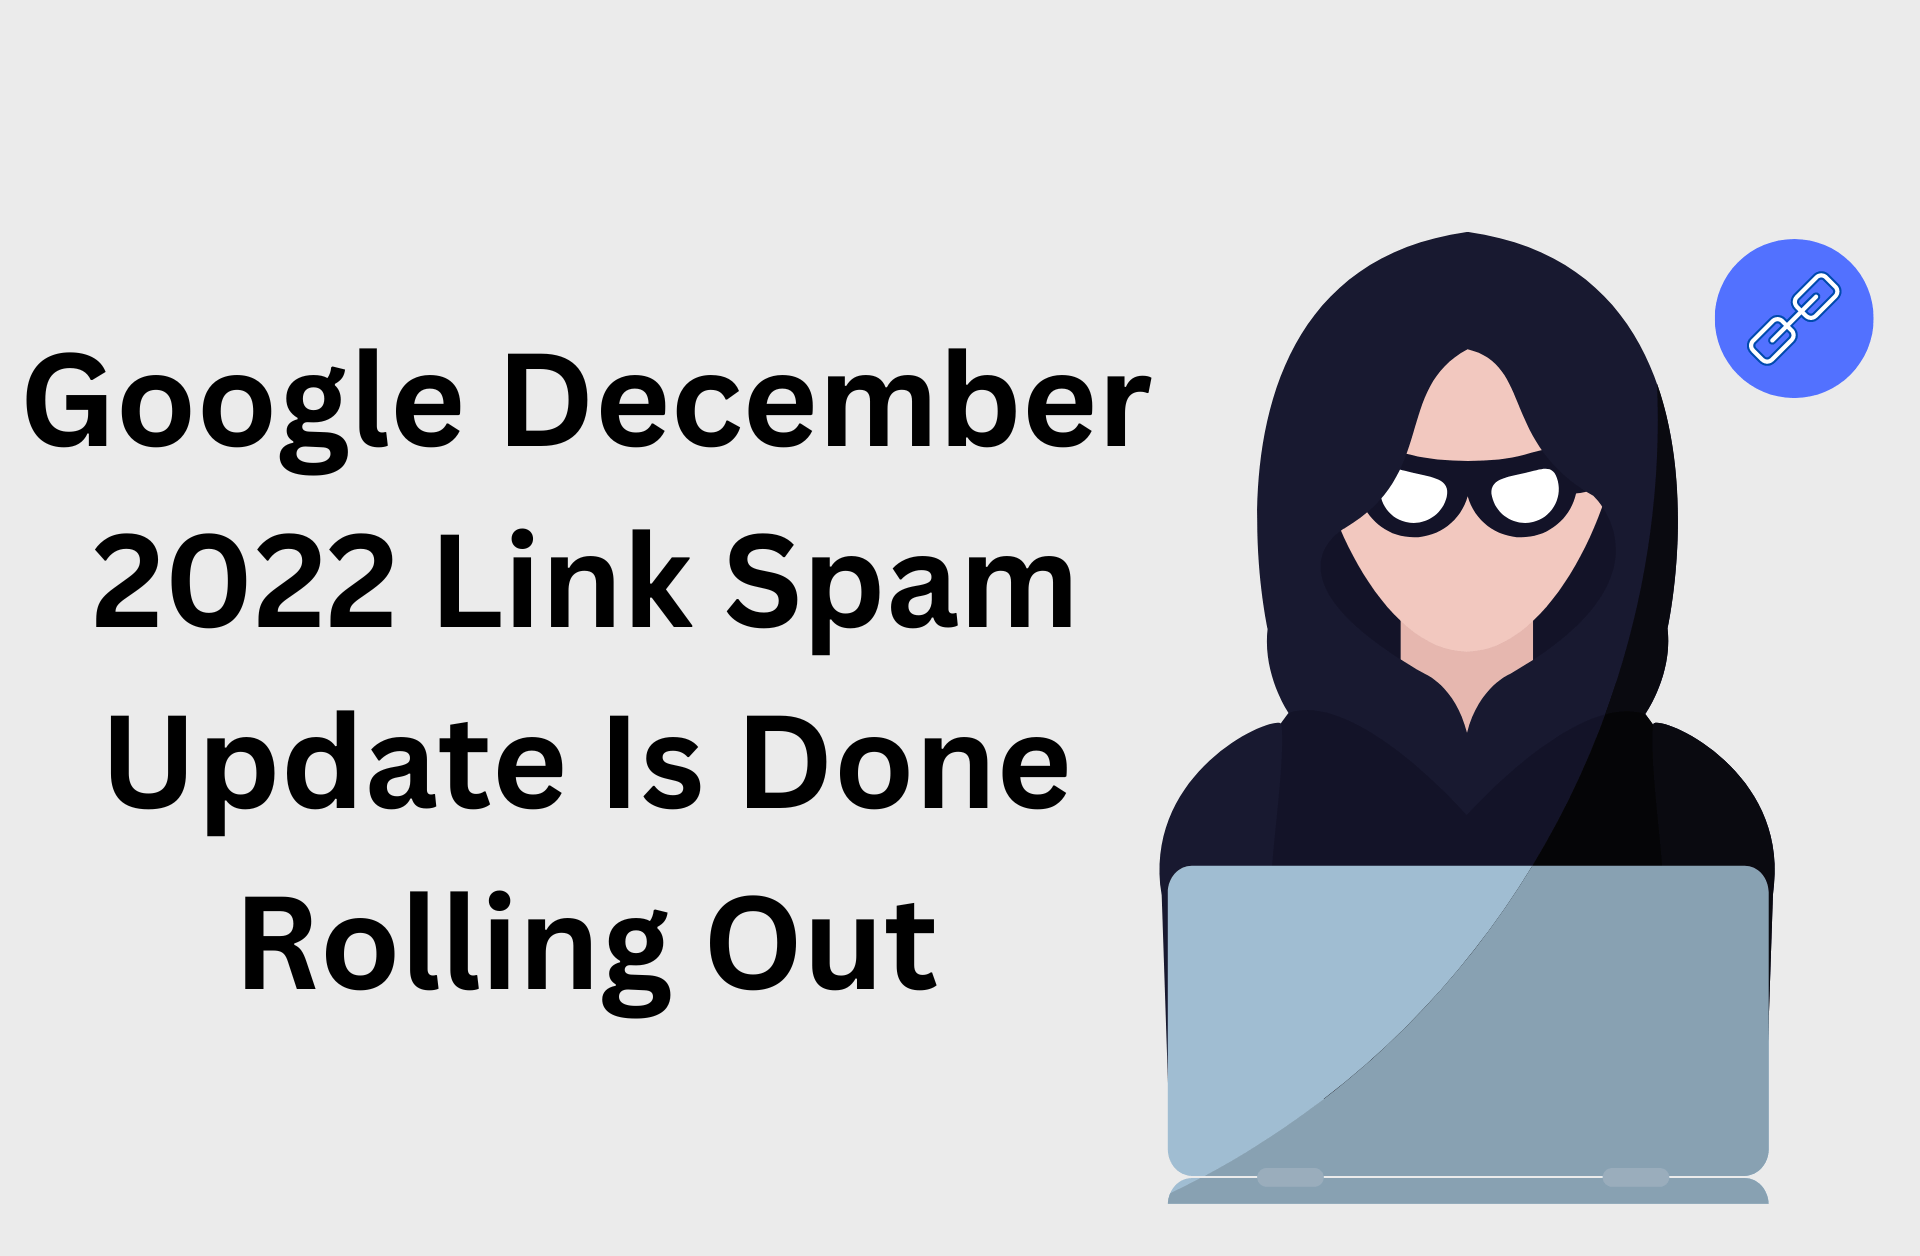 You are currently viewing Google December 2022 Link Spam Update Done Rolling Out